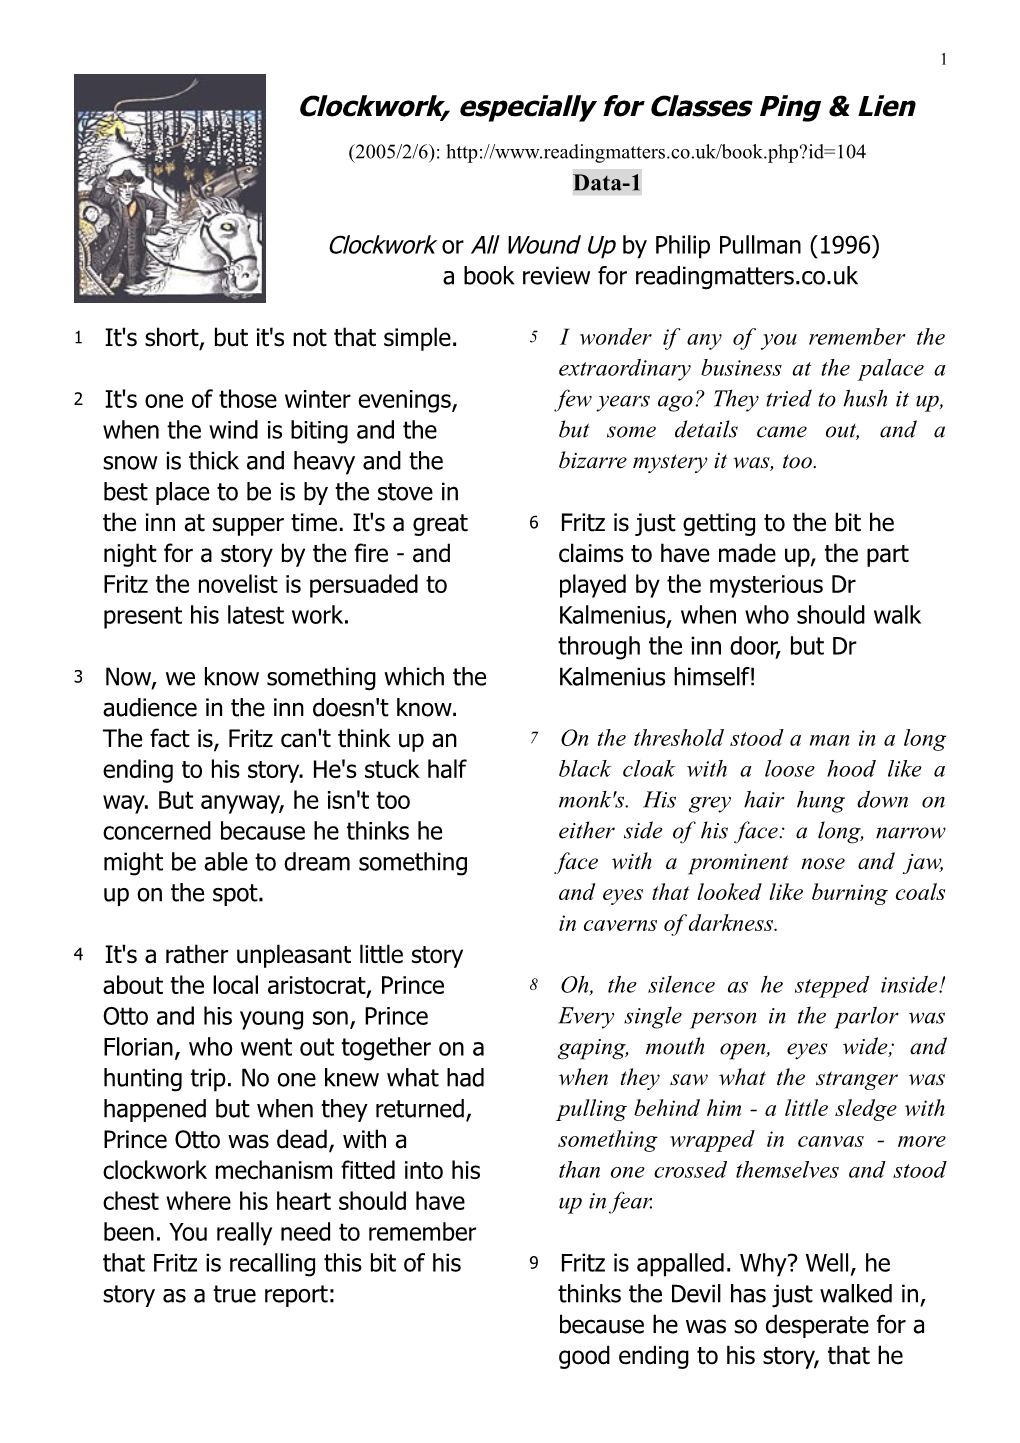 Clockwork Or All Wound up by Philip Pullman (1996) a Book Review for Readingmatters.Co.Uk